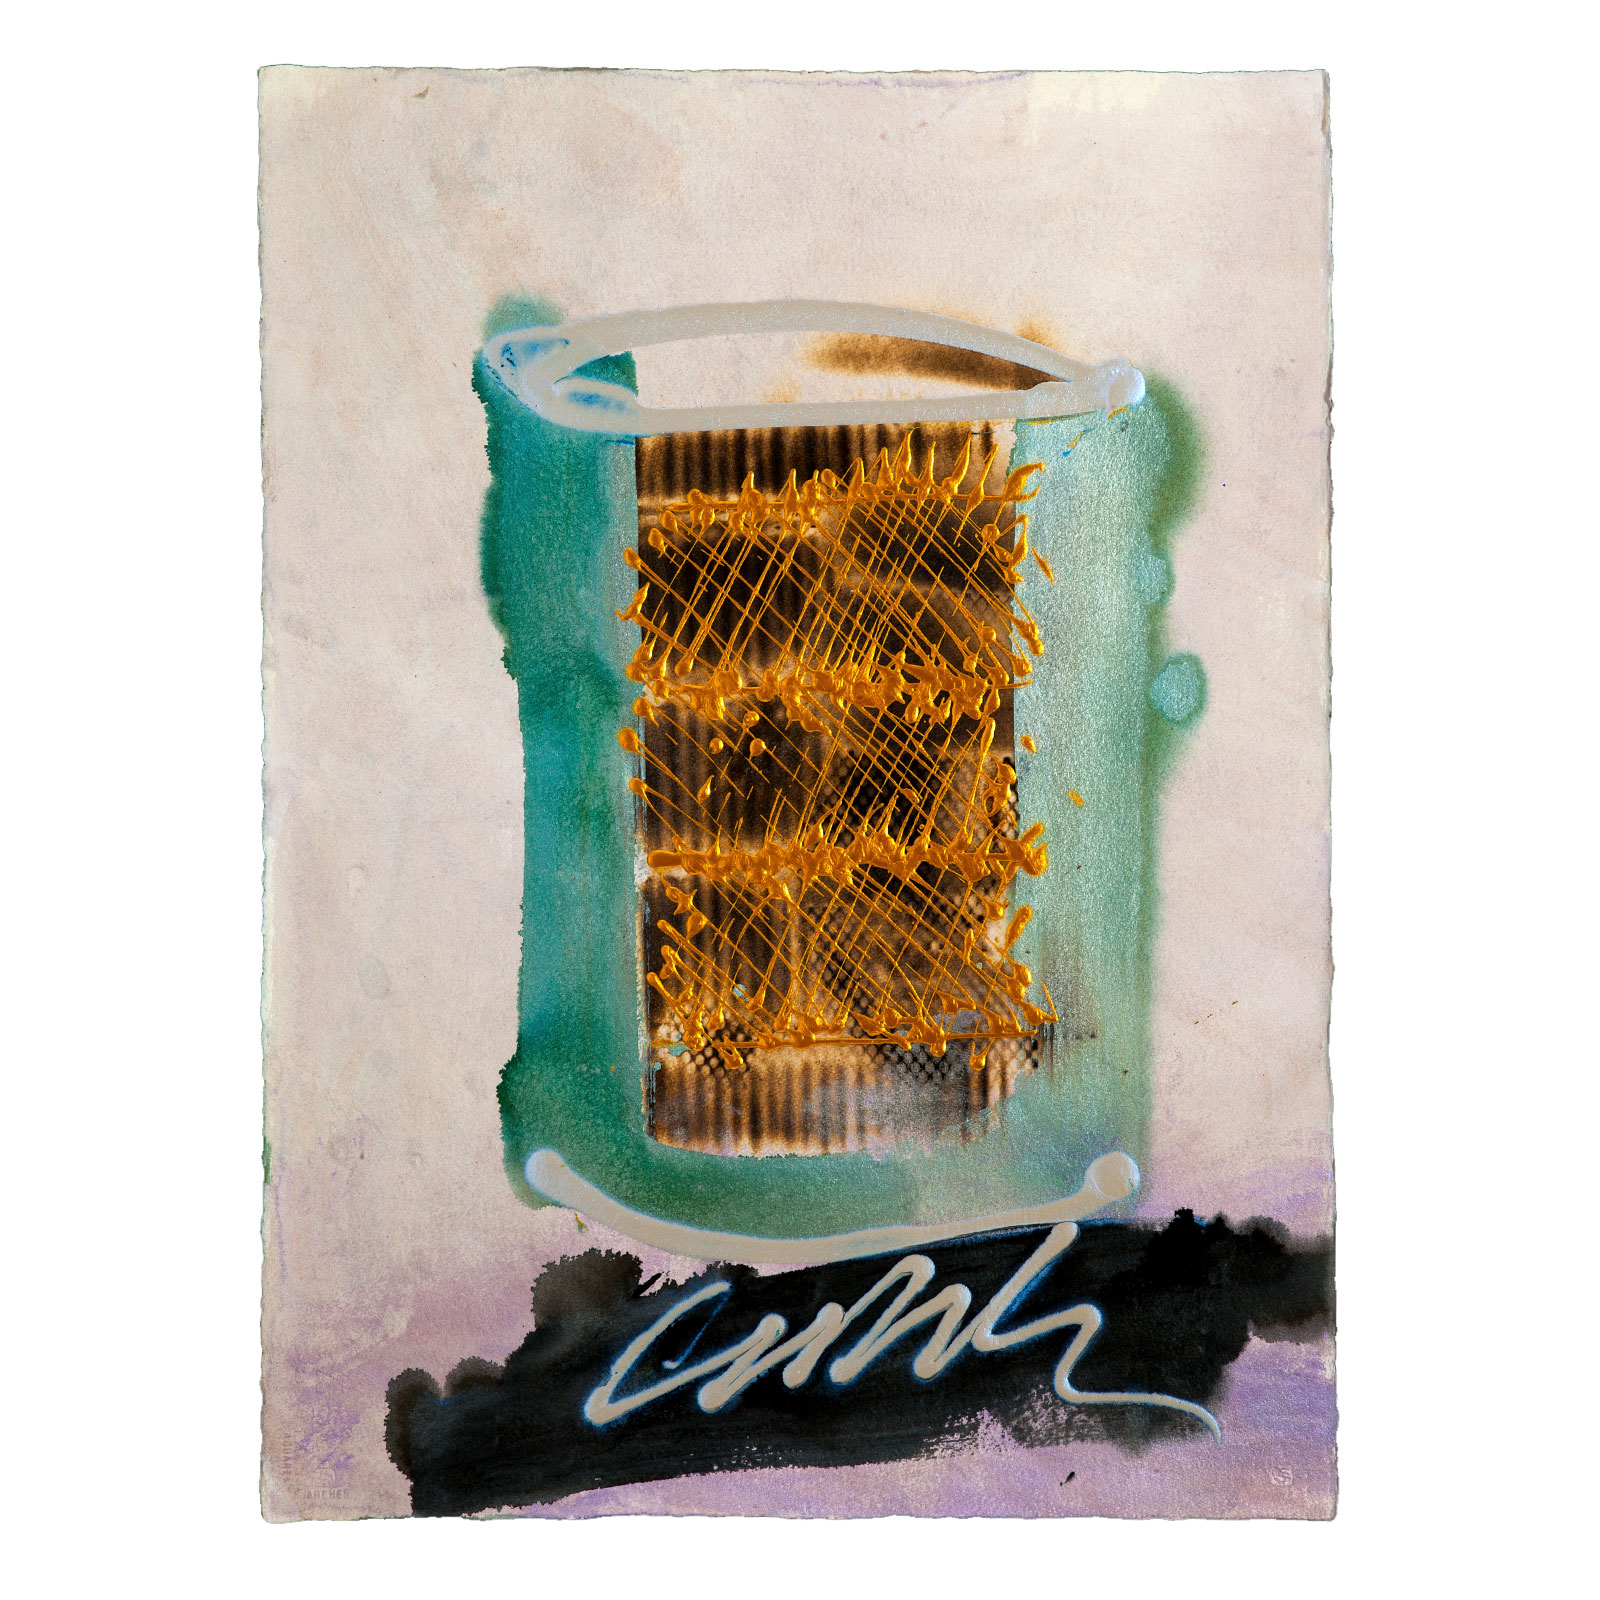 Burned Cylinder Drawing, 2013, by Dale Chihuly